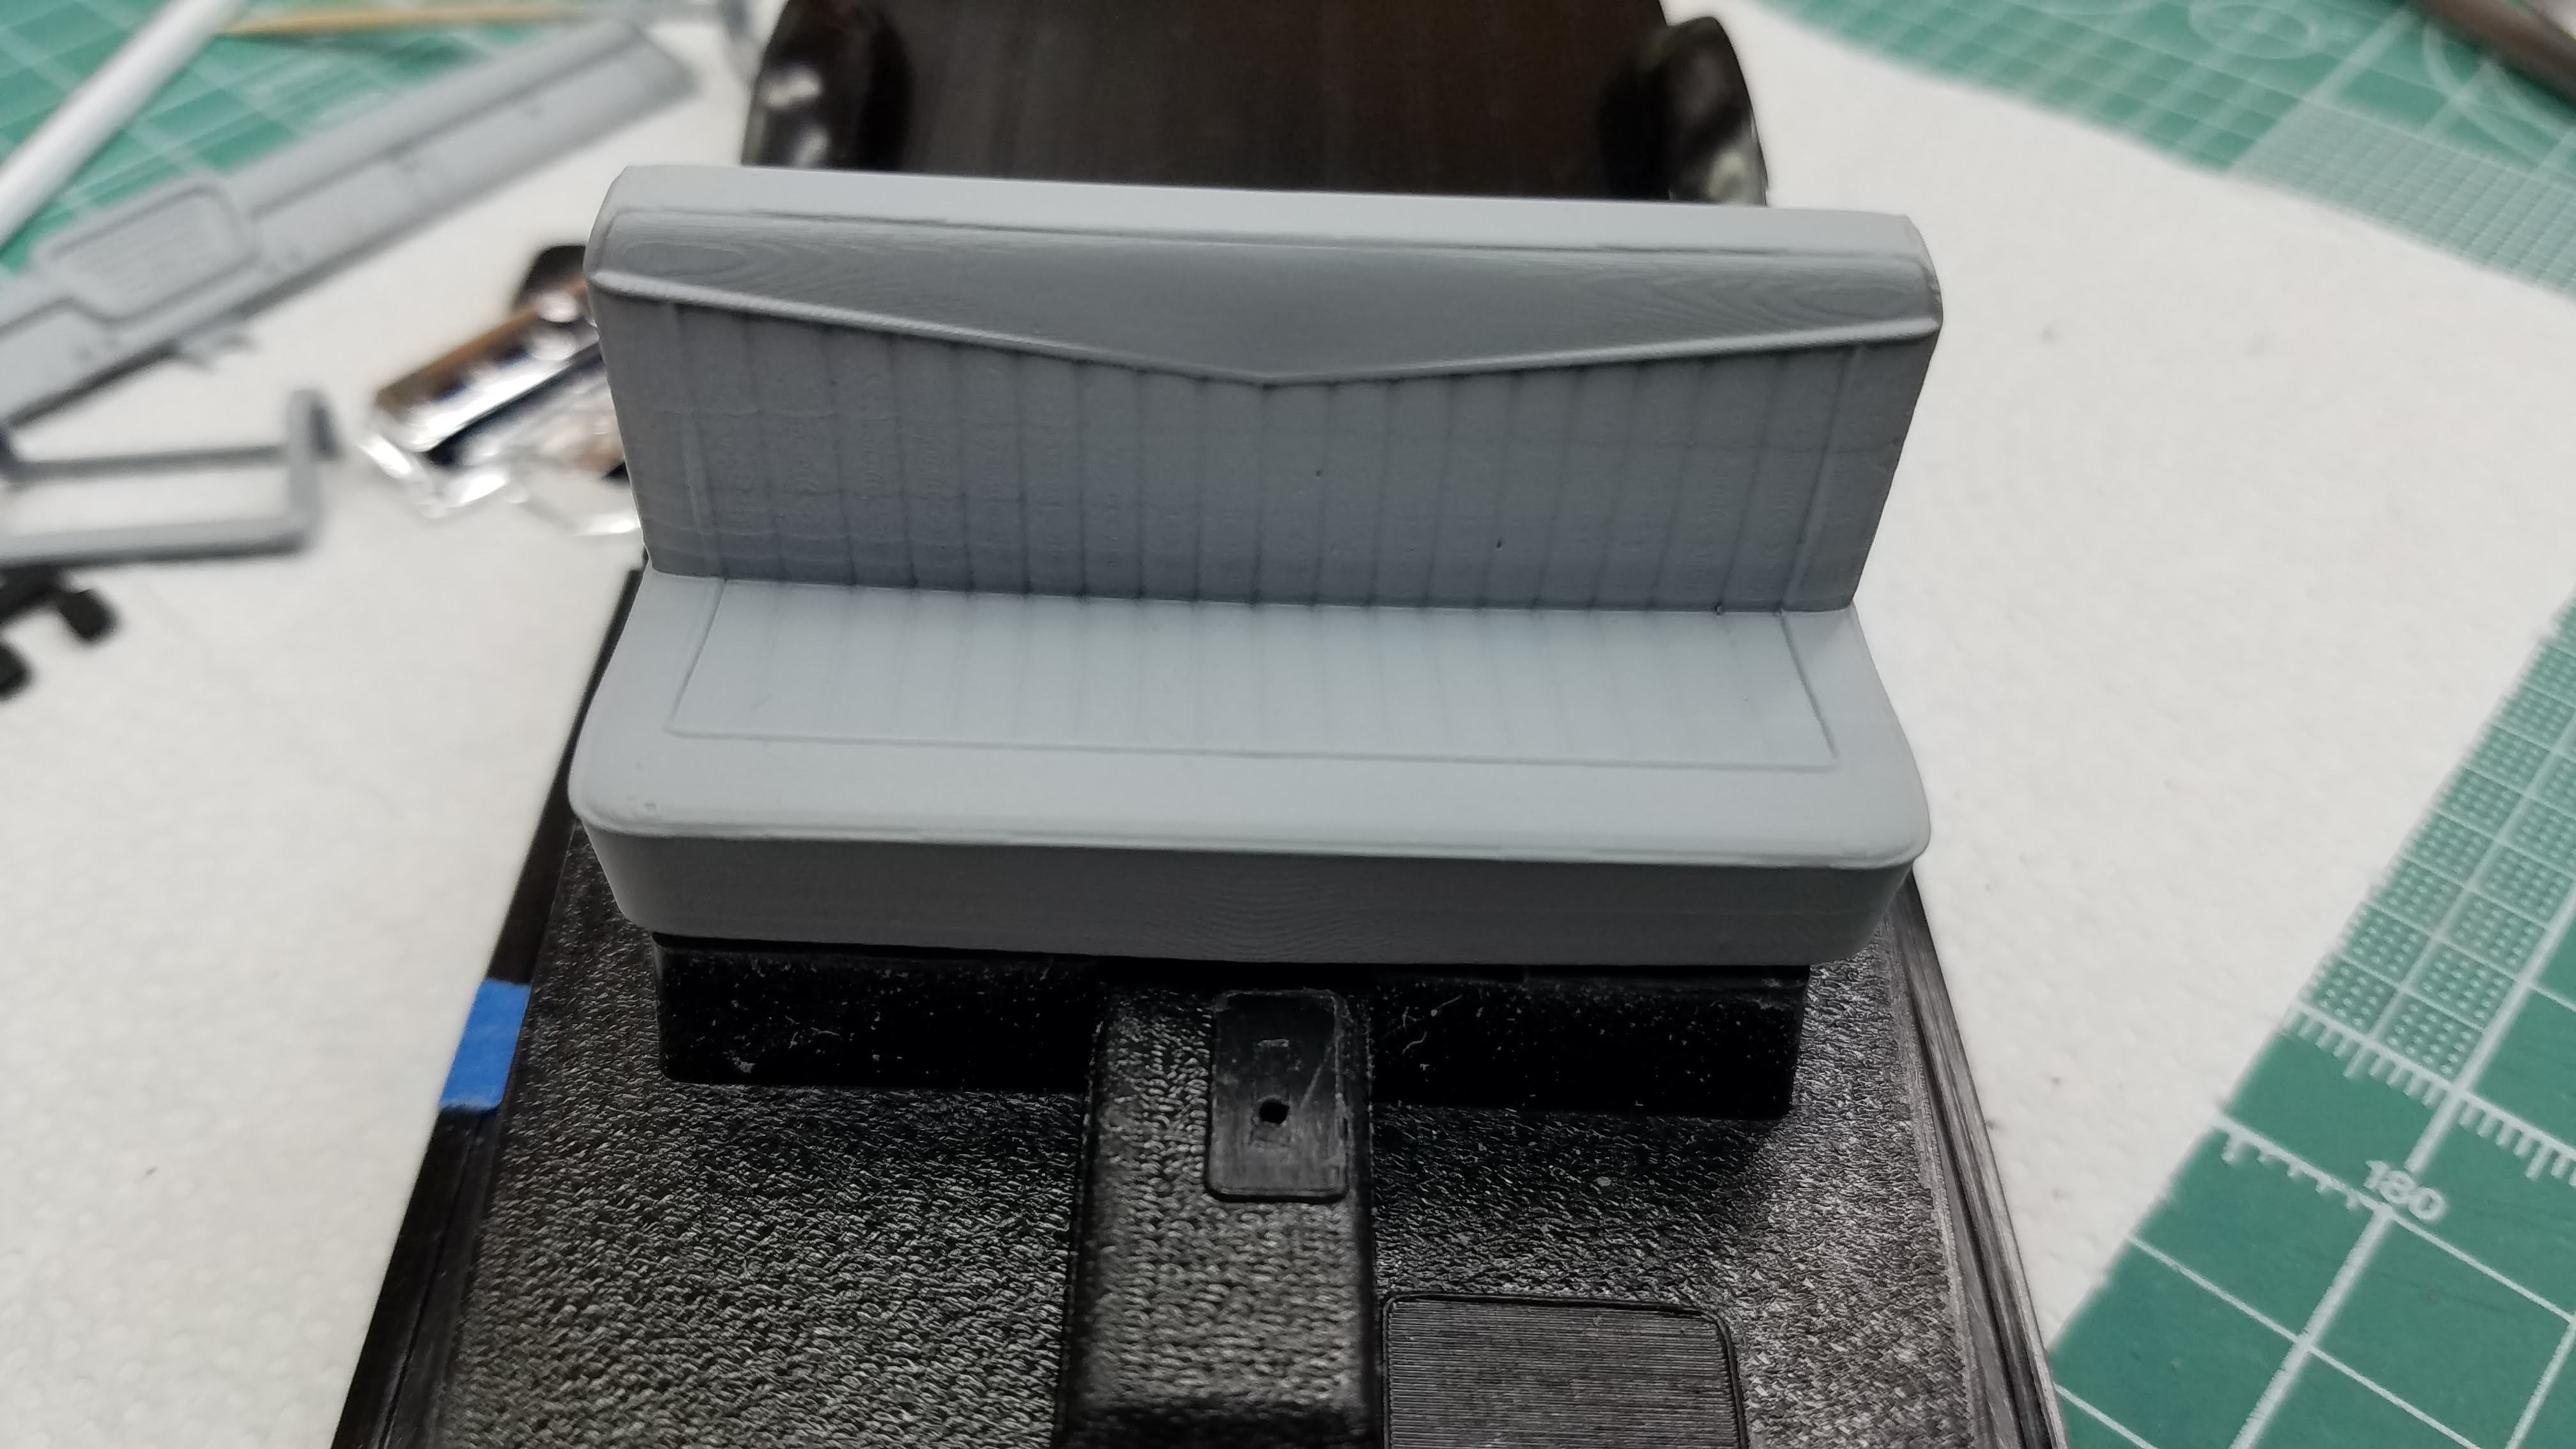 3D printed bench seat dry fitted to the interior tub